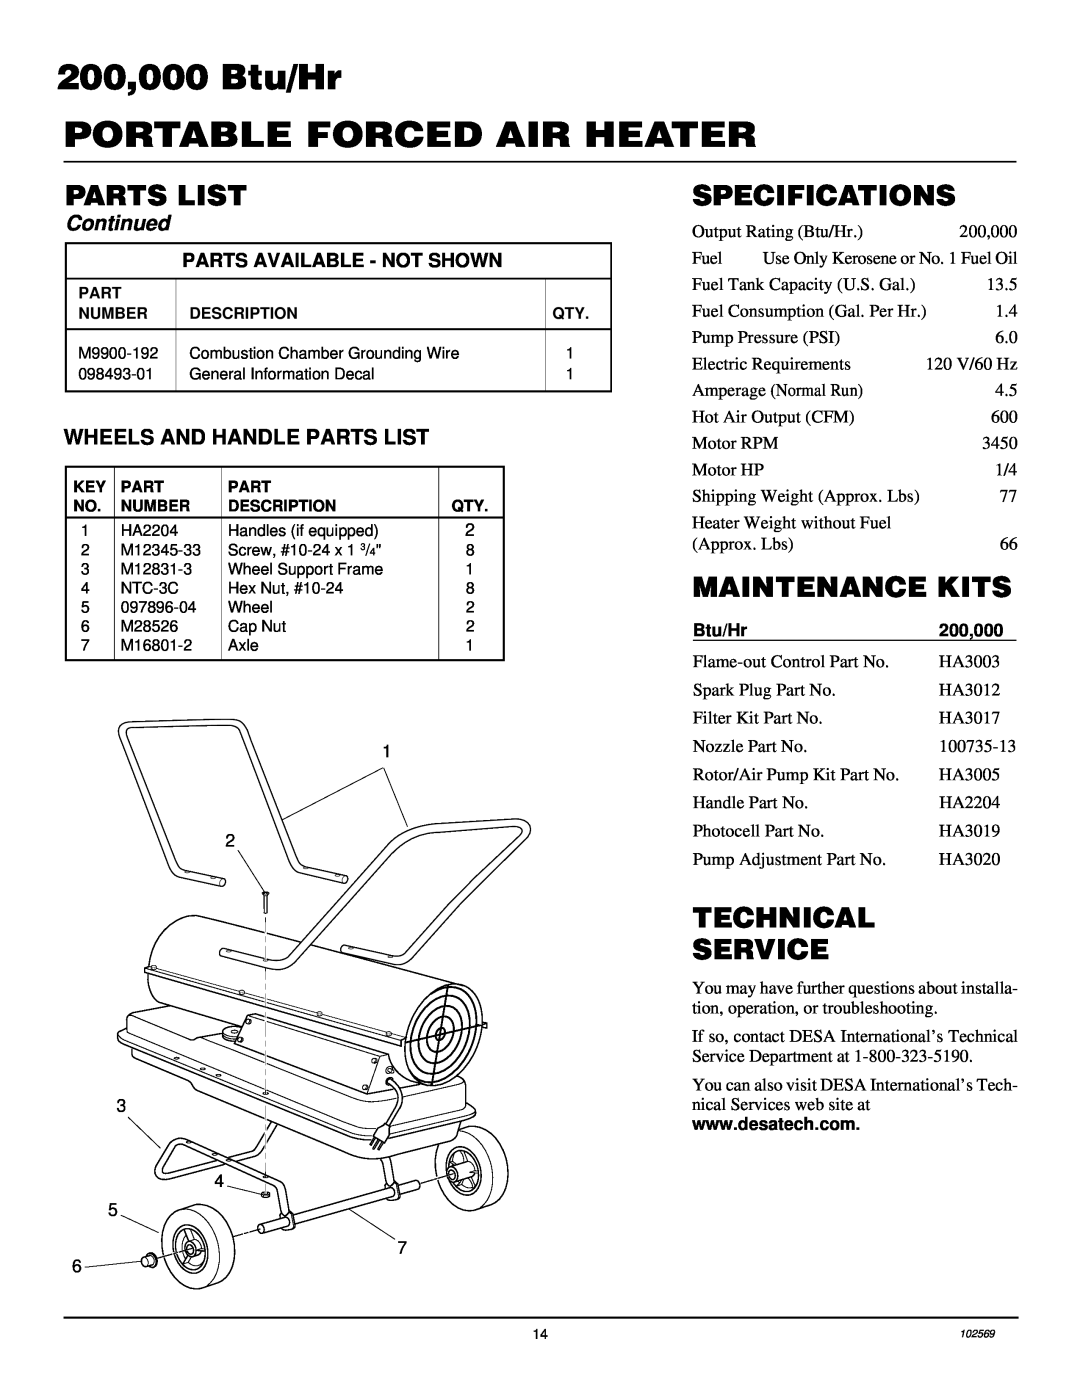 Desa B200 Specifications, Maintenance Kits, Technical Service, Wheels And Handle Parts List, Parts Available - Not Shown 